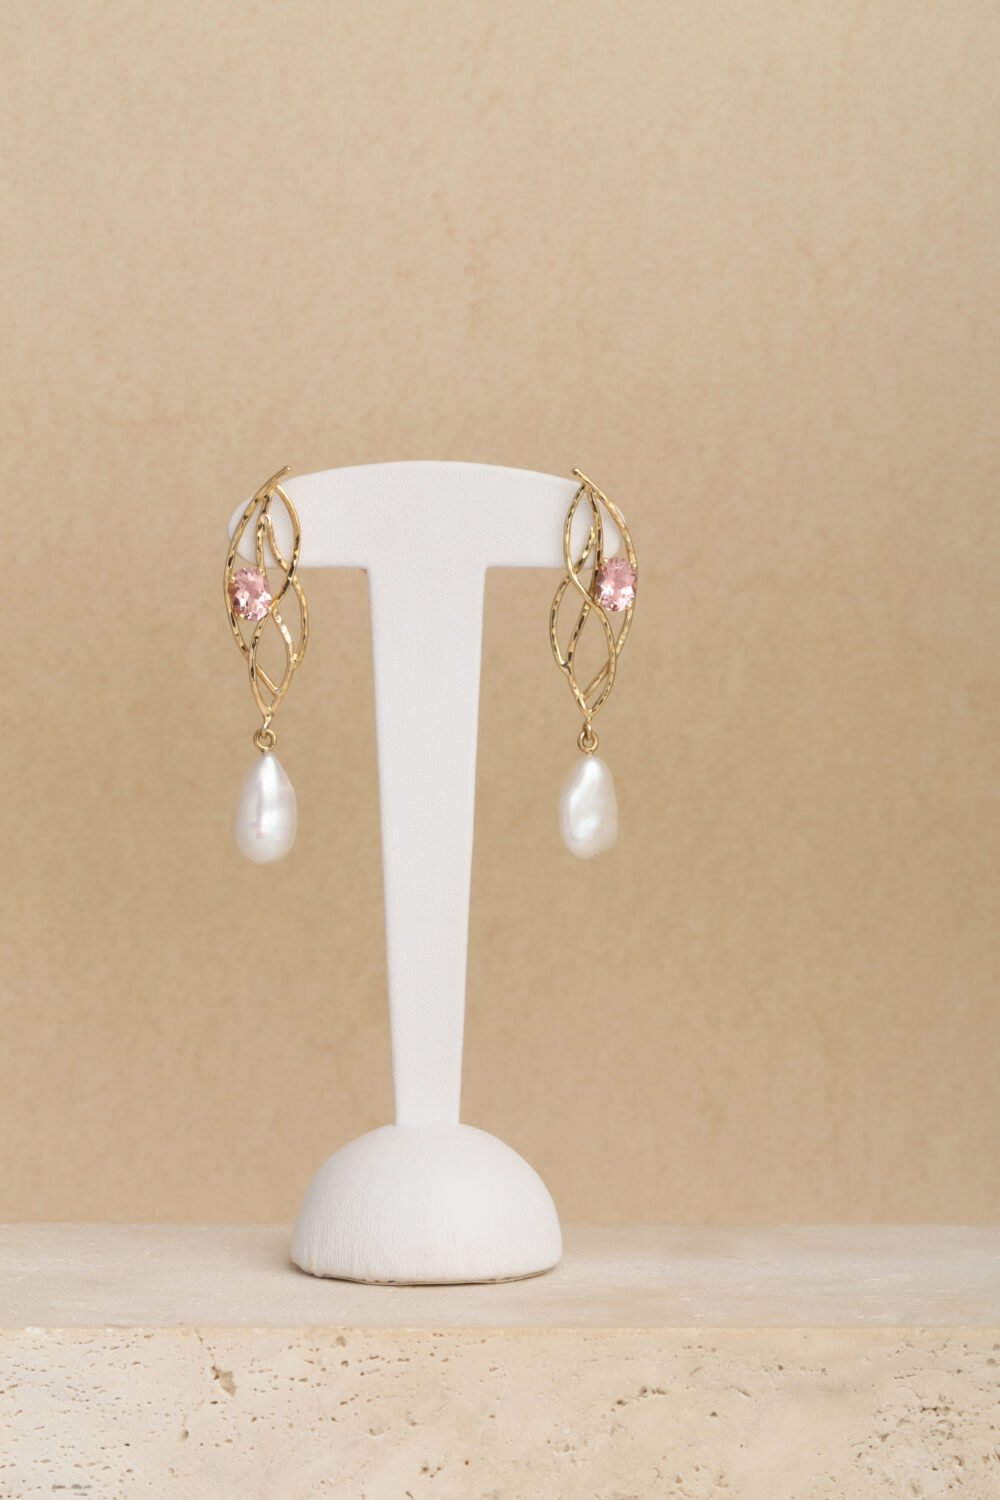 Morganite and Pearl earrings crafted from 18-karat yellow gold set with two oval cut morganite gemstones and two baroque drop-shaped pearls.